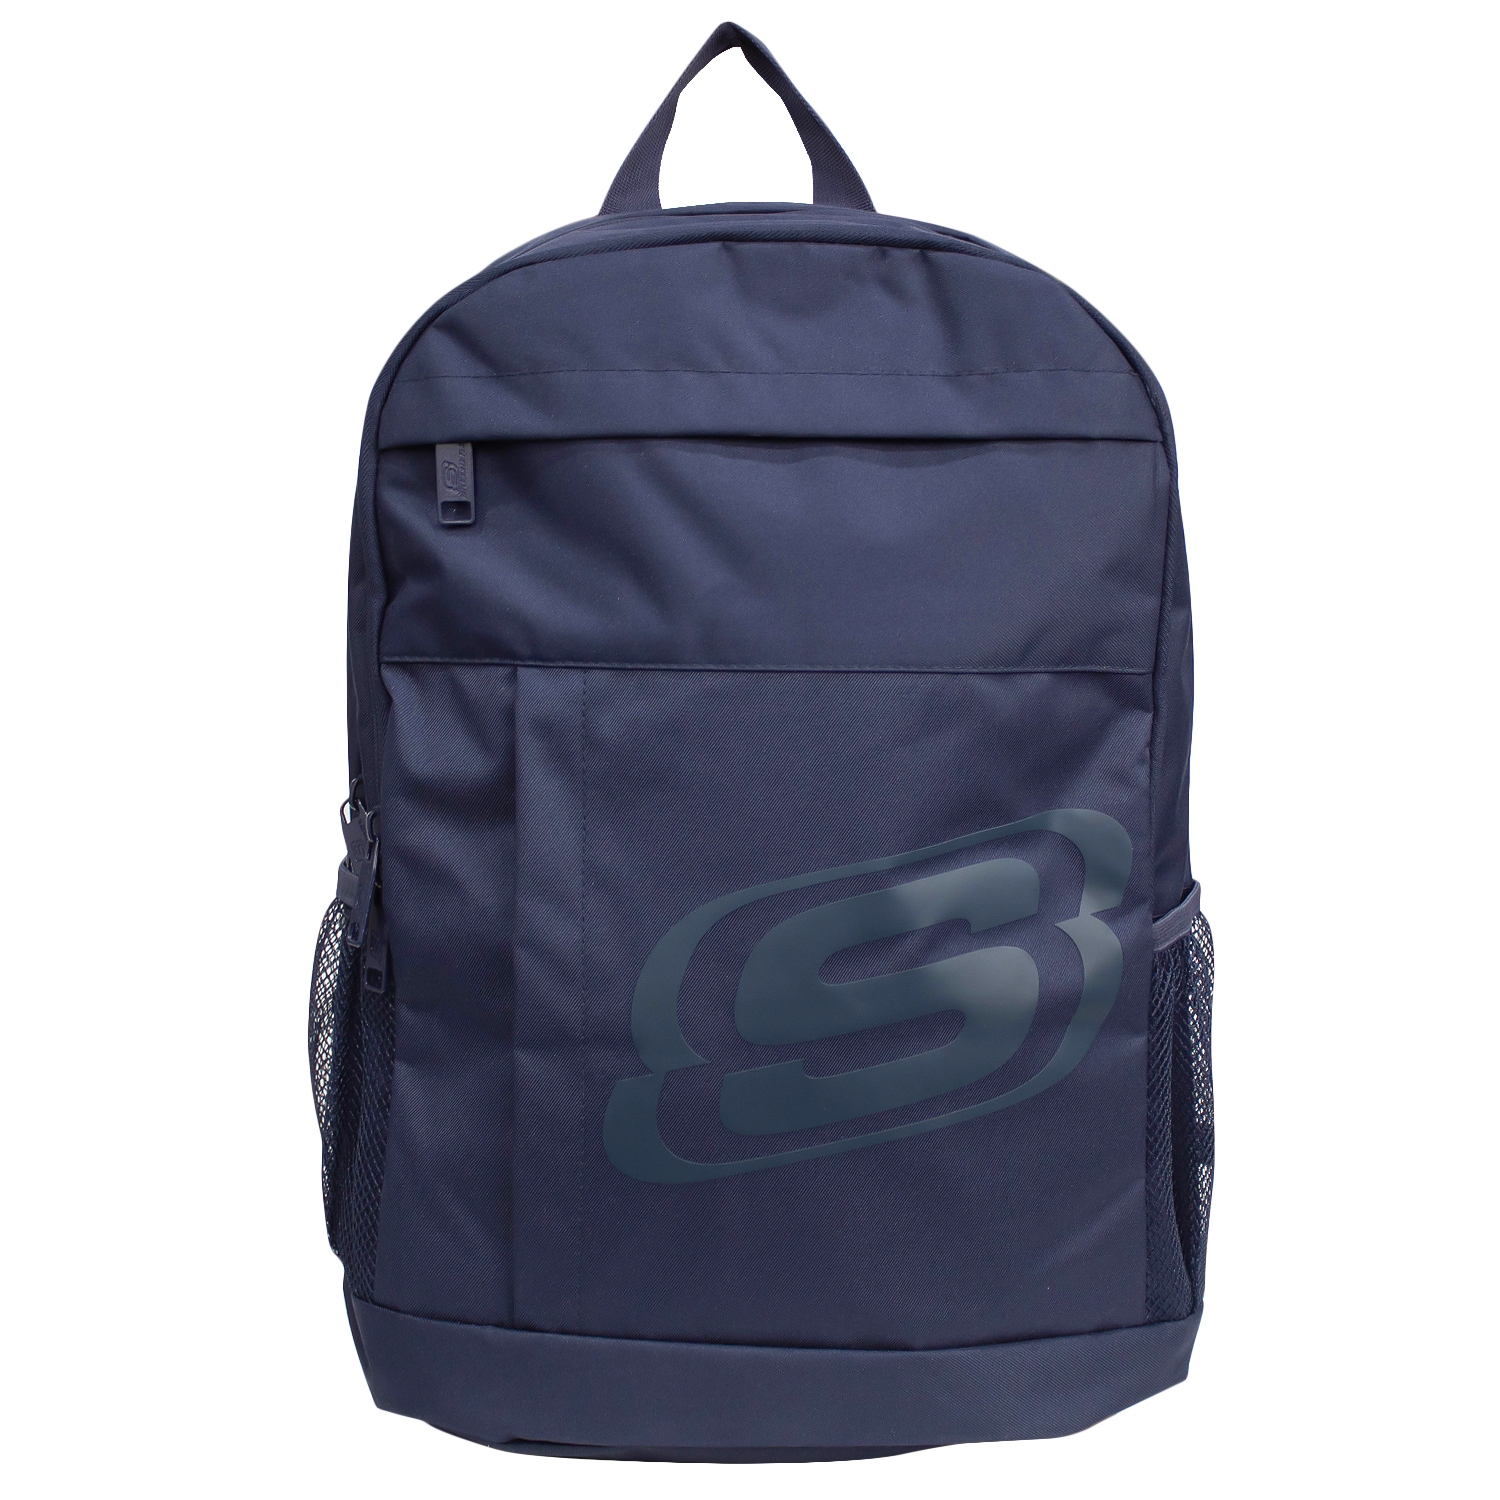 Foto de producto: Central backpack